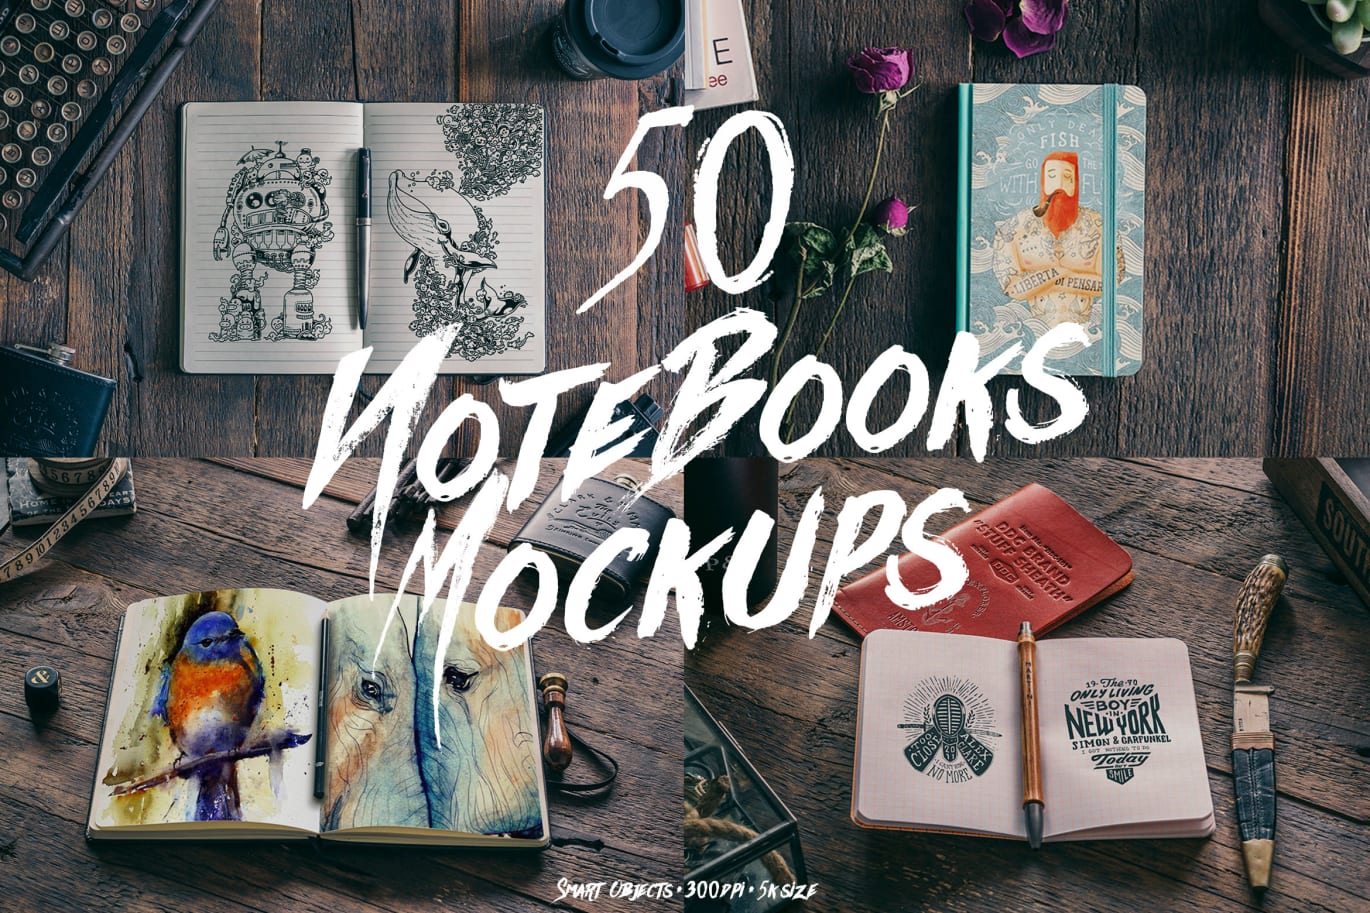 Download 50 Notebooks Mockups by Madebyvadim on Envato Elements